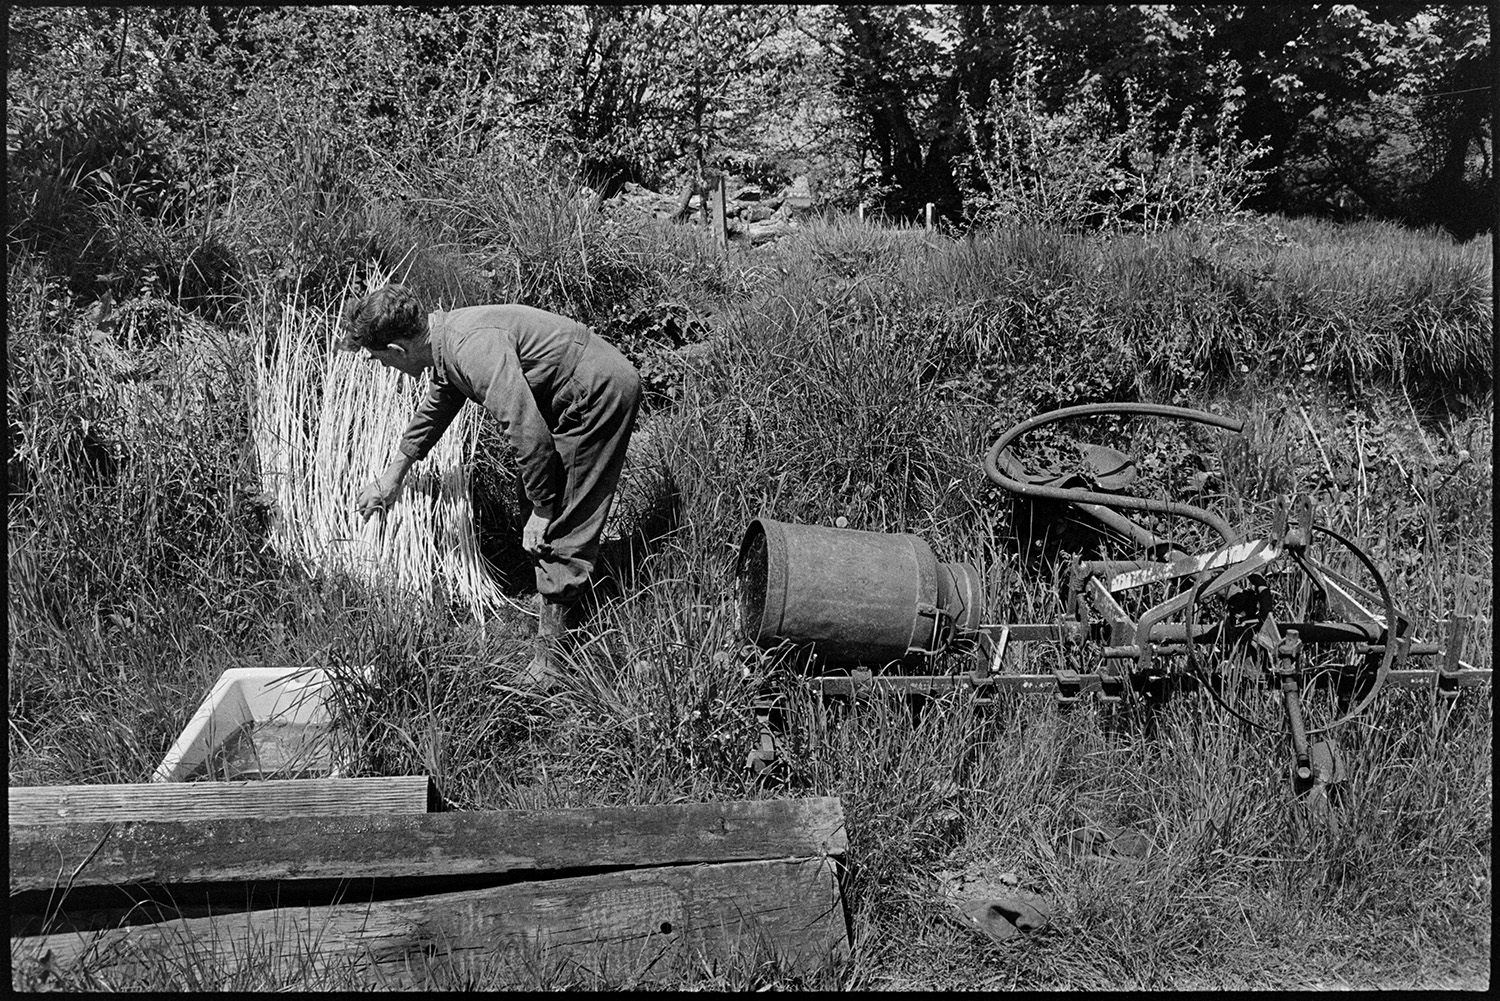 Two skinning (stripping) rods (willows) for basketwork and setting them out to dry. 
[Bill Folland setting out willow, which he has stripped, to dry by a hedgebank at Colehouse, Riddlecombe. Old overgrown farming machinery can also be seen b the hedgebank.]